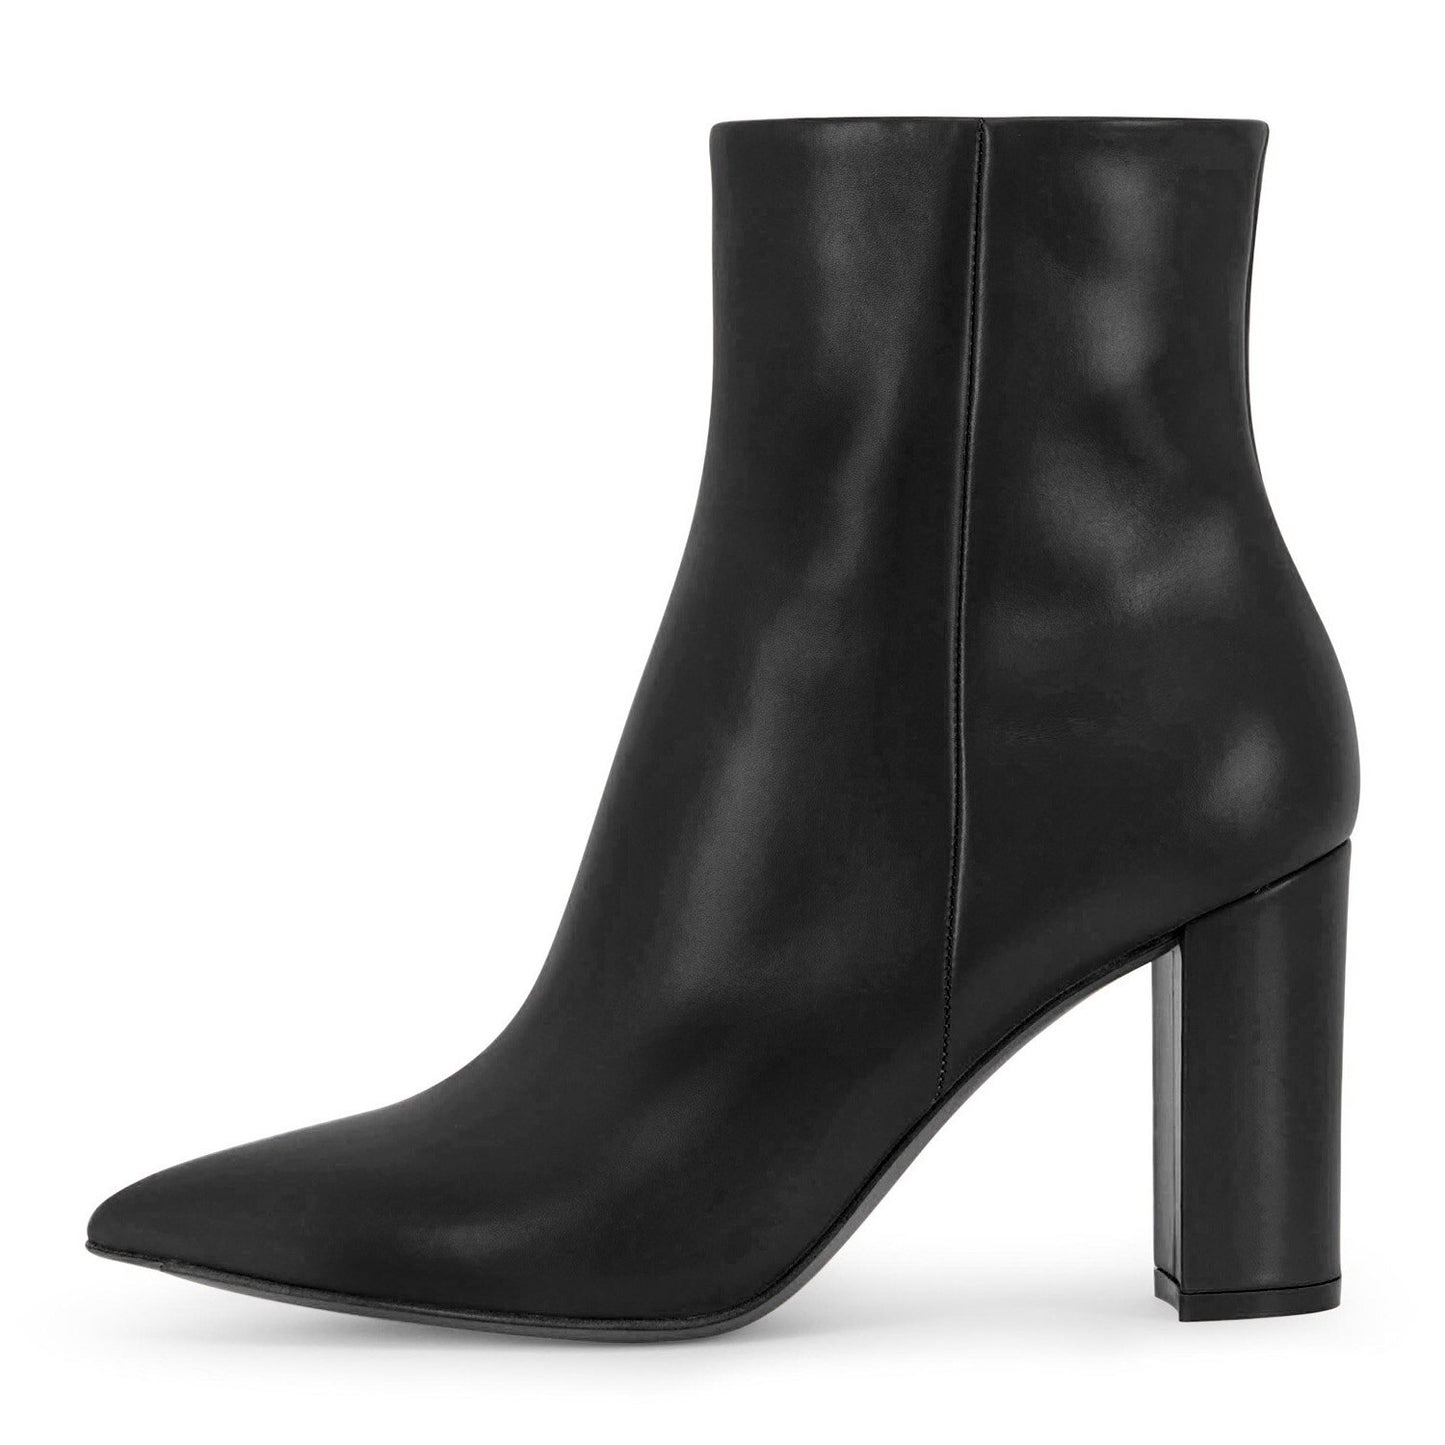 Black Leather Ankle Boots Red Sole Kate Stiletto Heel Pointed Toe